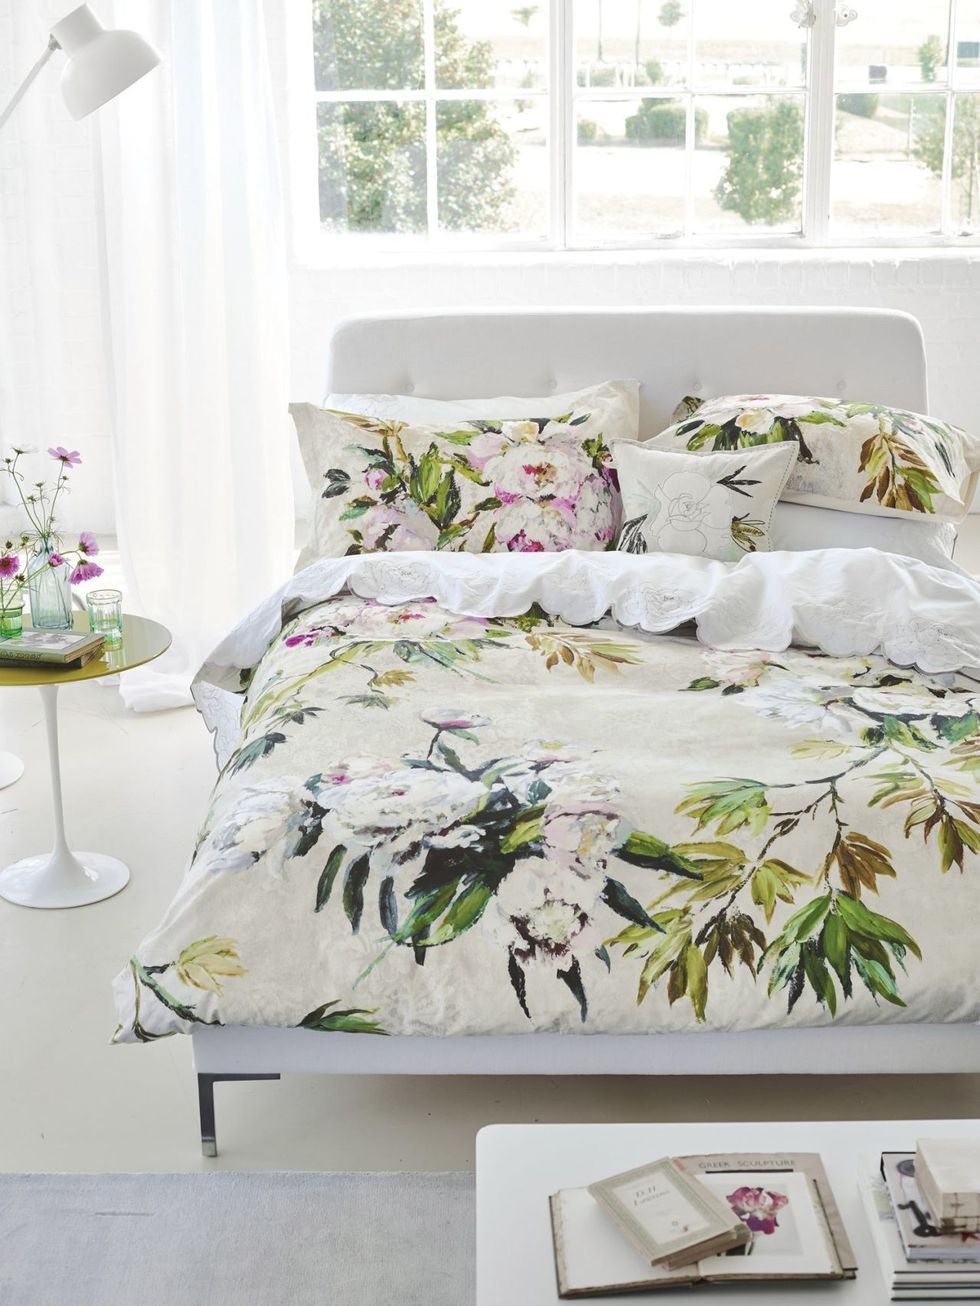 <p>You've got to have a flowery flourish <em data-redactor-tag="em" data-verified="redactor">somewhere –</em> and this 200 thread count bedding is something of a floral fantasy. It&nbsp;would be complemented with a big vase of&nbsp;British blooms. If we're being seasonal&nbsp;here (and we are) pink peonies, hyacinths and daffodils would do the trick.&nbsp;</p><p><strong data-redactor-tag="strong"><a href="https://www.houseoffraser.co.uk/home-and-furniture/designers-guild-floreale-grande-duvet-cover/d764833.pd?ef_id=WfMfAAAAAHDPyUX5:20180129145725:s#261034399&amp;_$ja=tsid:96381|cid:955786257|agid:46170971023|tid:pla-436755275517|crid:226797550726|nw:g|rnd:8275283168578936348|dvc:c|adp:1o2|mt:" target="_blank" data-tracking-id="recirc-text-link">BUY NOW:&nbsp;£63, Designers Guild</a></strong><span class="redactor-invisible-space" data-verified="redactor" data-redactor-tag="span" data-redactor-class="redactor-invisible-space"></span></p>